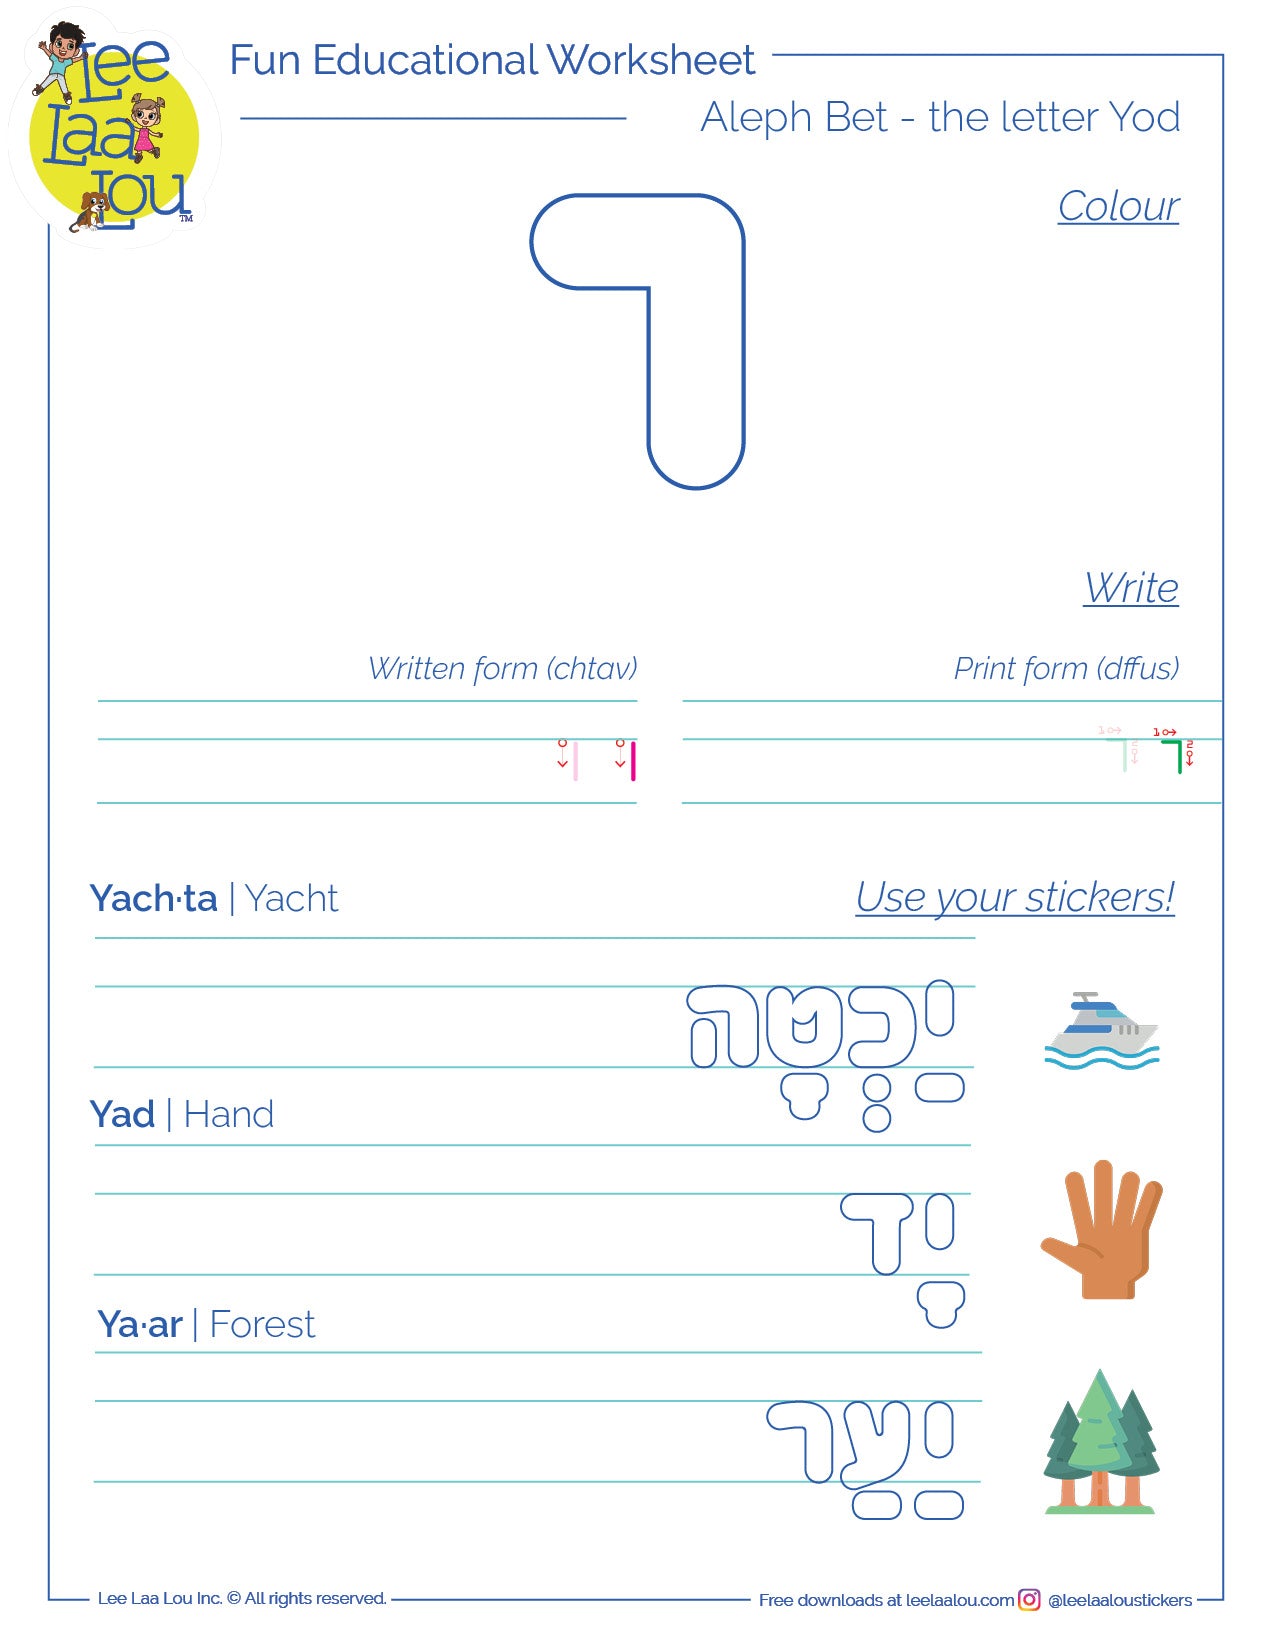 The tenth 10th letter of the Hebrew alphabet - Yod - Aleph Bet worksheet